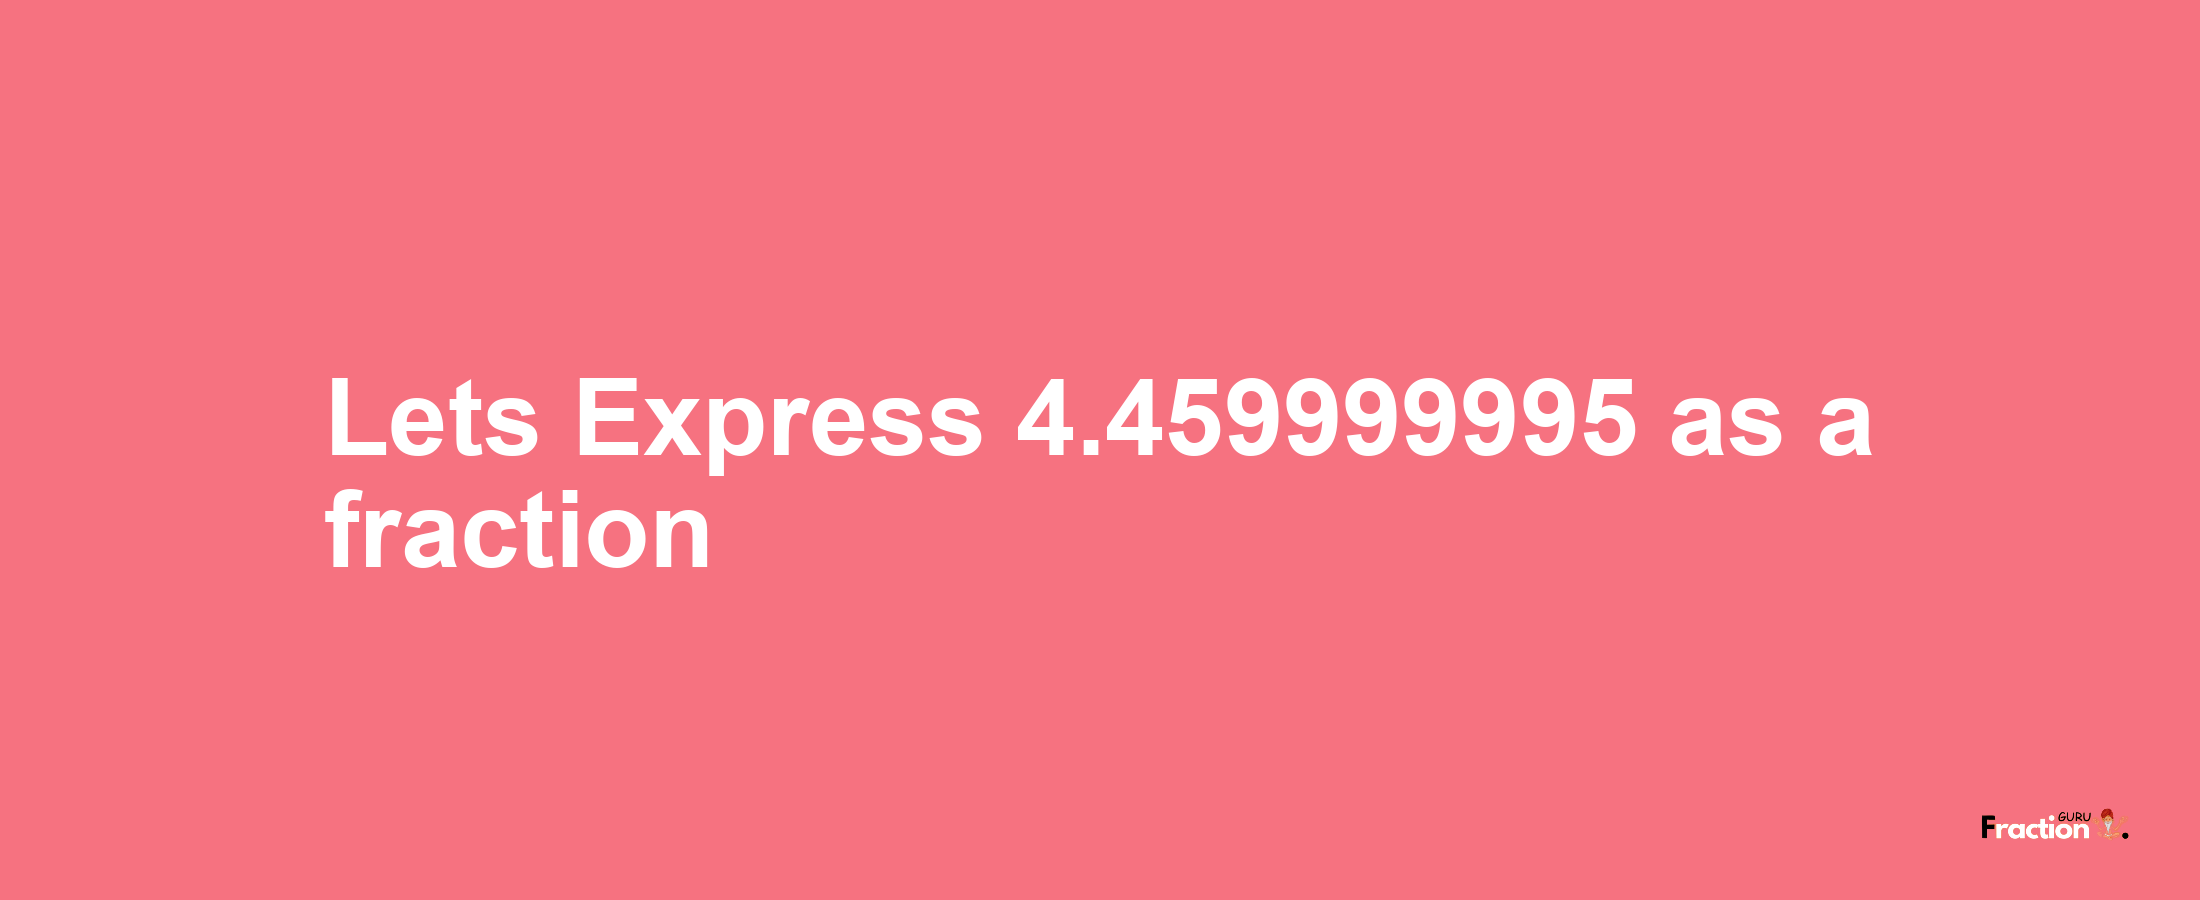 Lets Express 4.459999995 as afraction